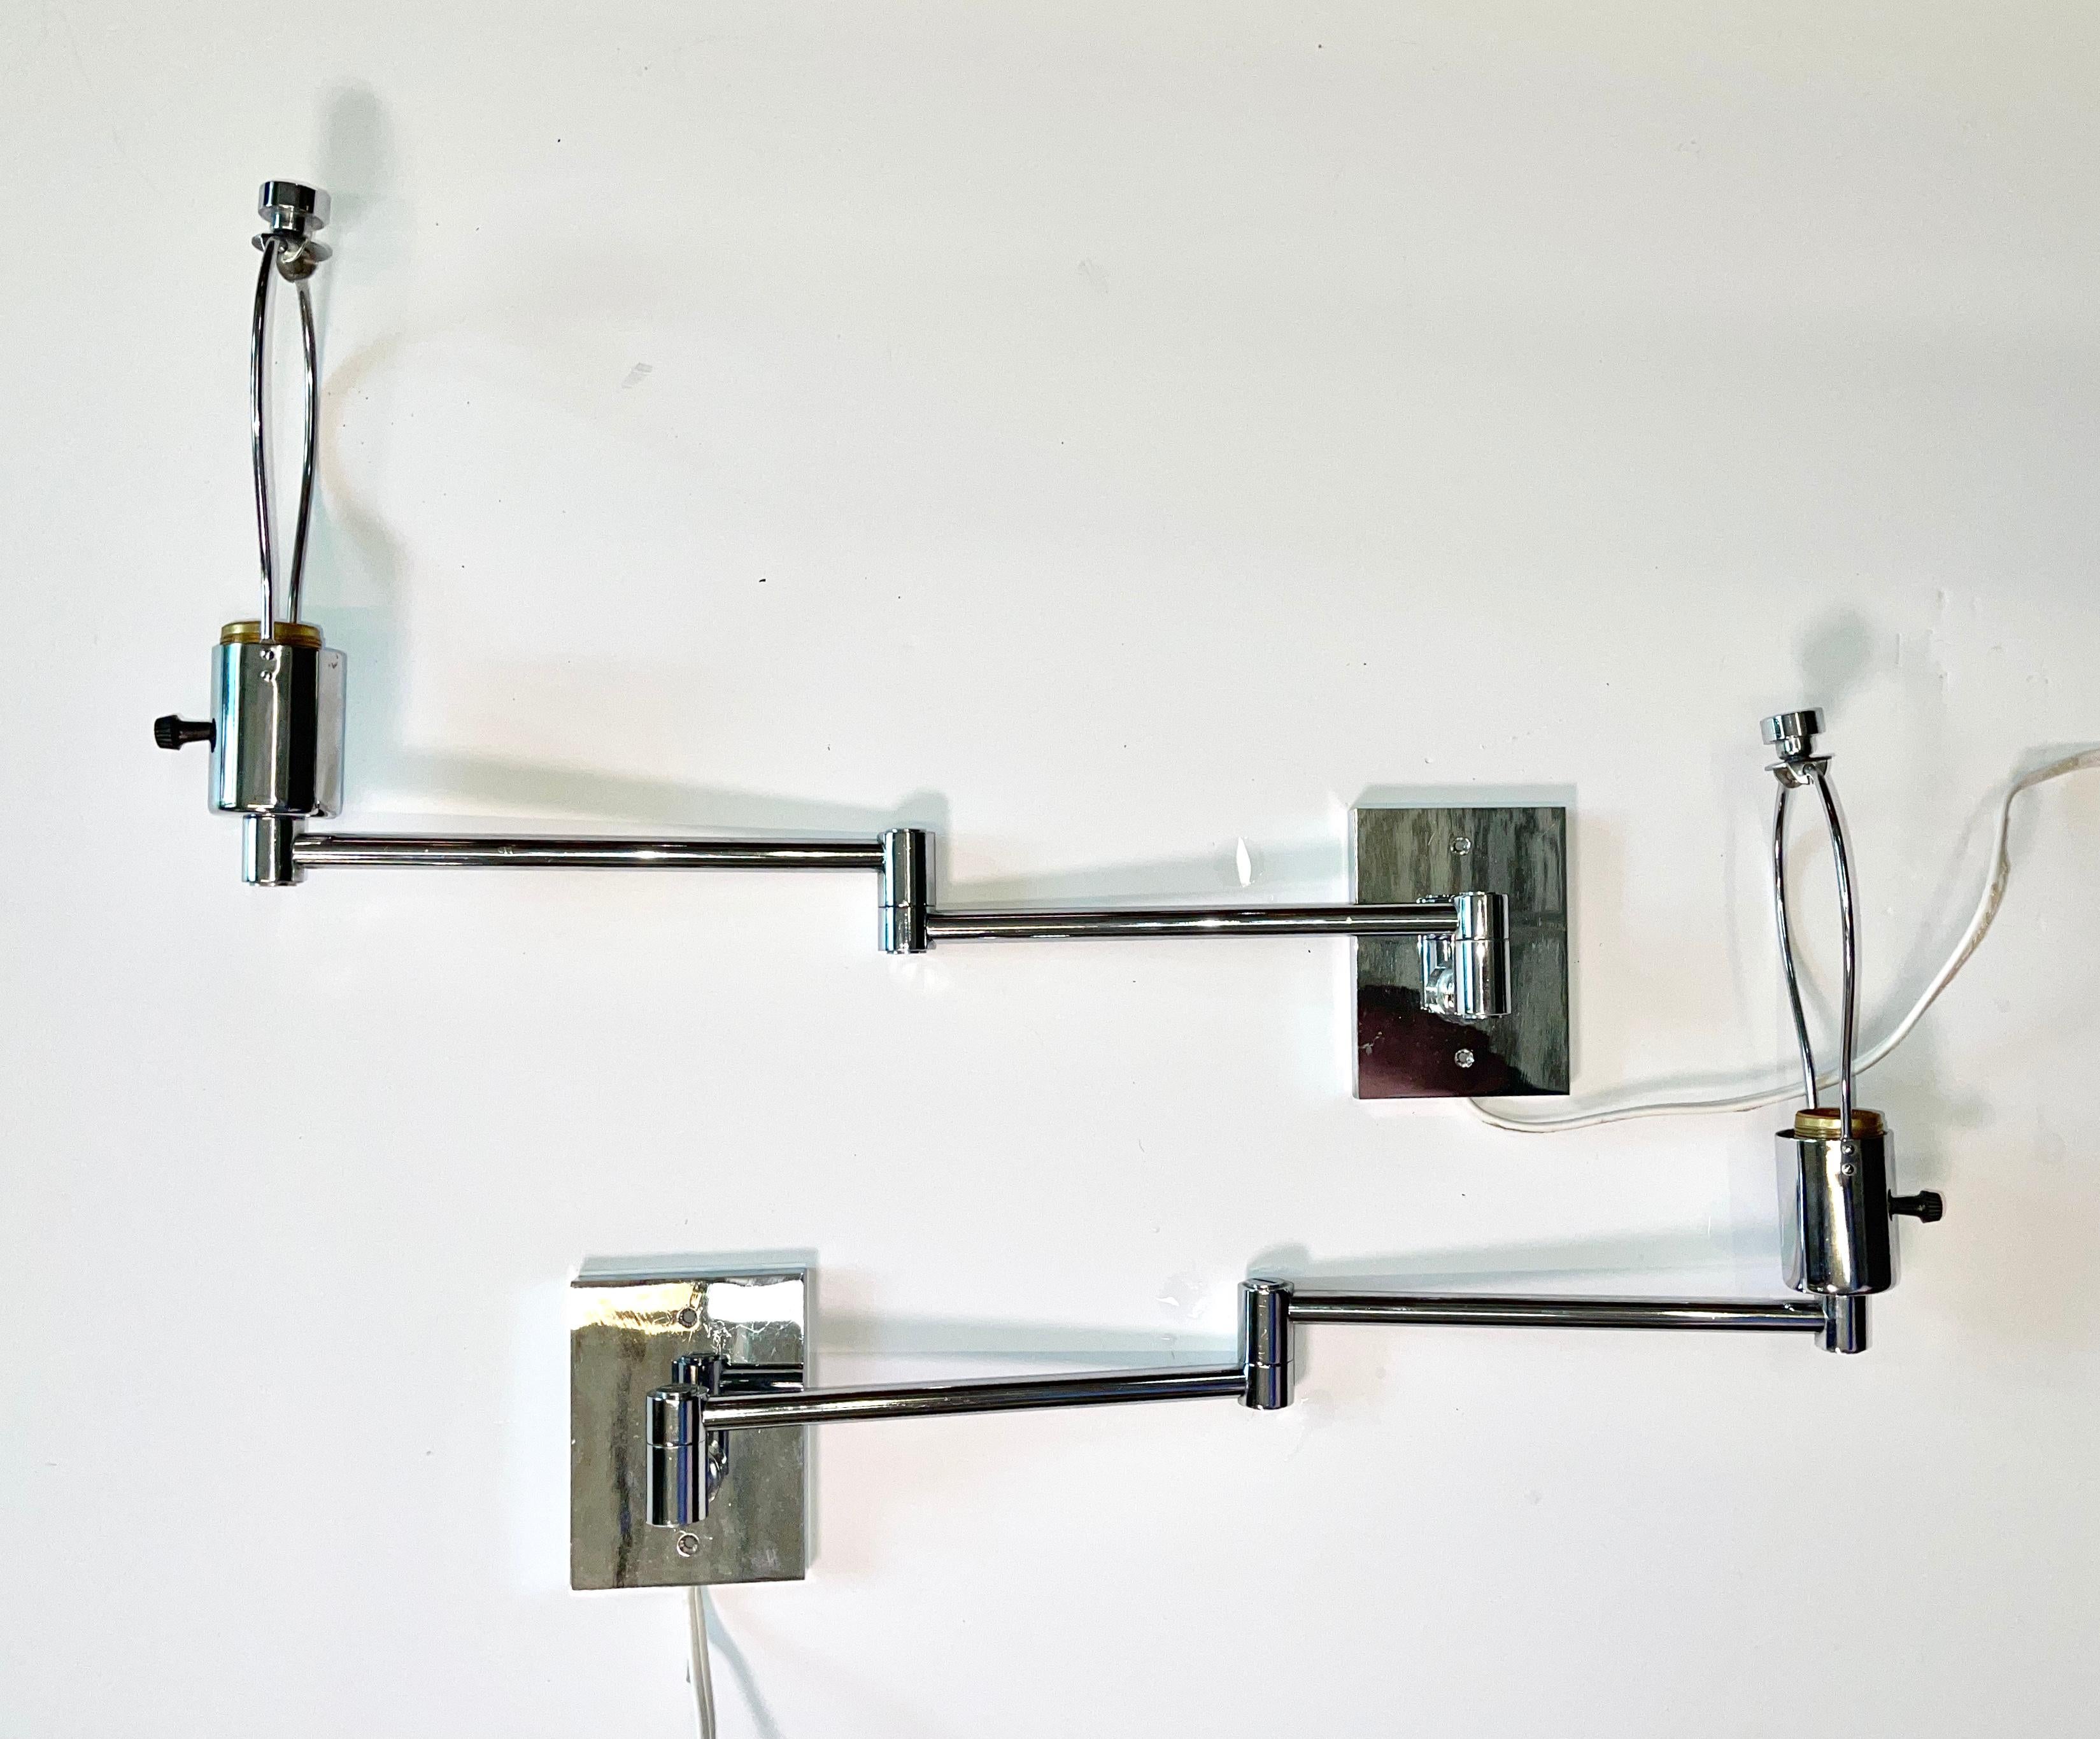 Produced by Metalarte Spain, original vintage pair of George W. Hansen's famous wall mounted swing-arm lamps.
Both lamps come with chrome square tube cord cover and their original lampshade.
Designed by Georg W. Hansen in 1947 while improvising a